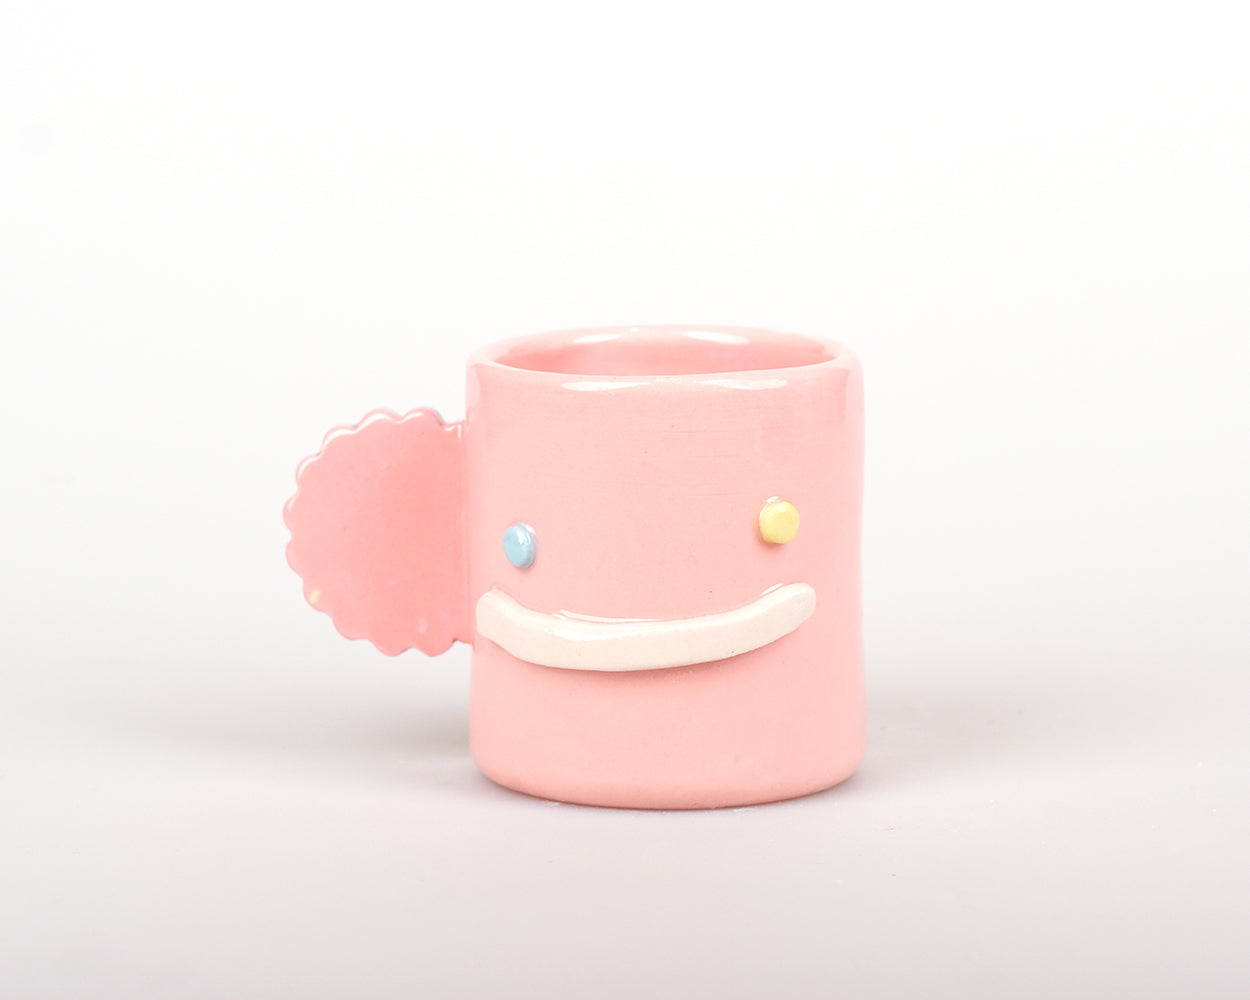 Mixed Emojis - Lil' cup